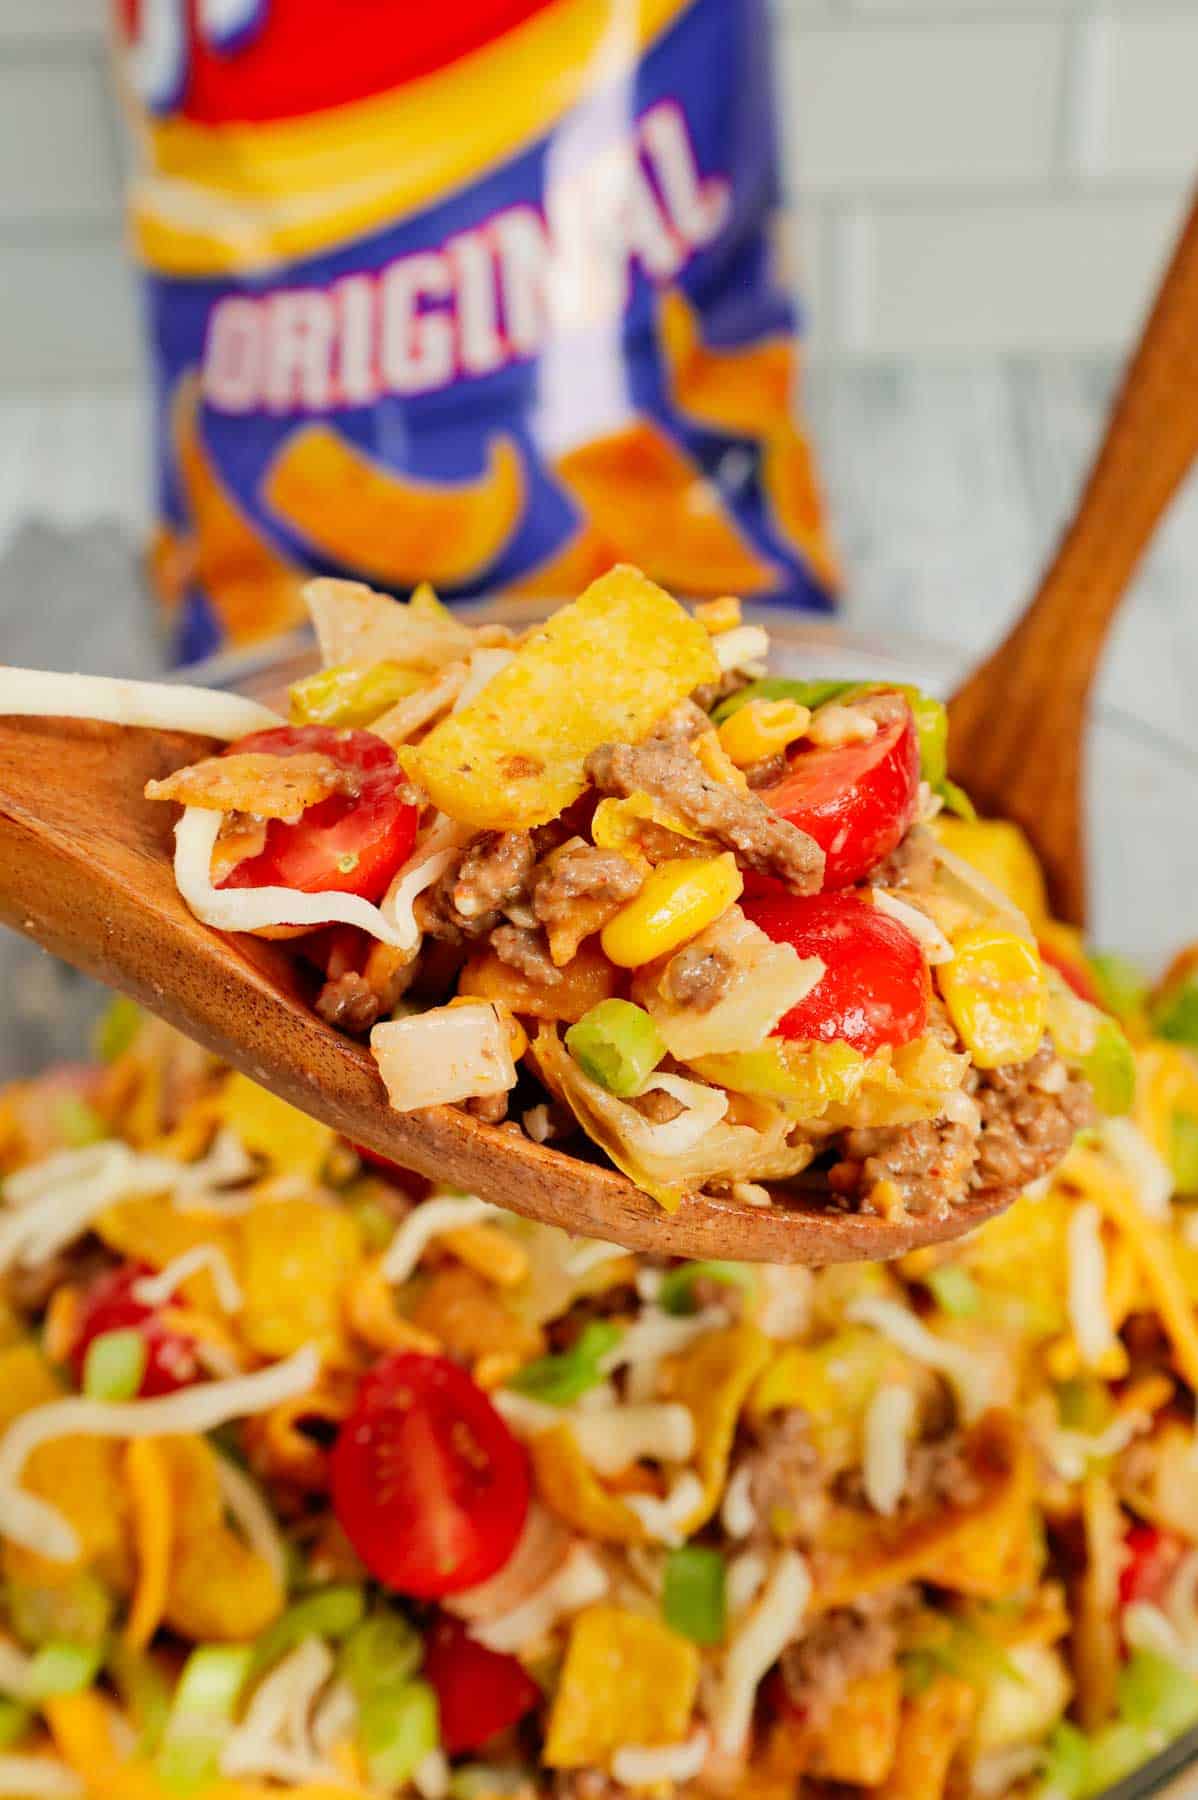 Frito Taco Salad is a delicious meal or side dish recipe loaded with ground beef, taco seasoning, lettuce, red onions, green peppers, grape tomatoes, corn, shredded cheese, salsa, ranch dressing and Fritos corn chips.